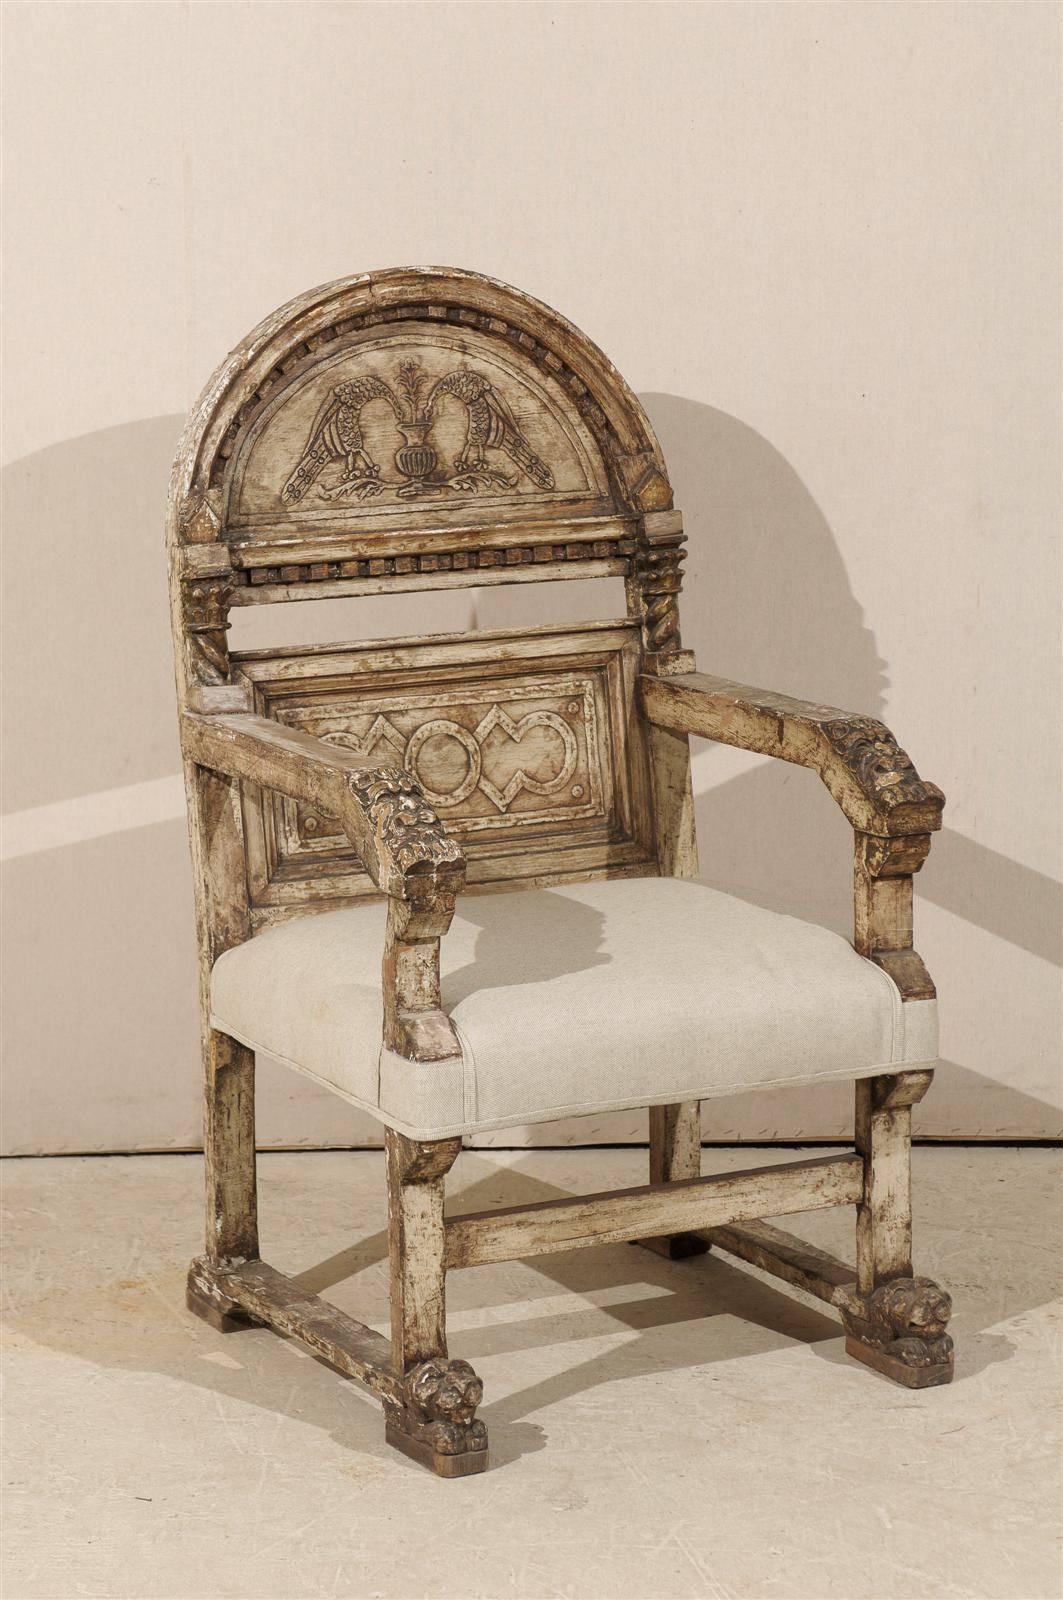 An Italian early 19th century richly decorated single wooden chair with animal feet, stretcher and semi-circular back ornate with birds drinking from an urn carving.  The back rest also features intricate dentil molding details.  A pair of